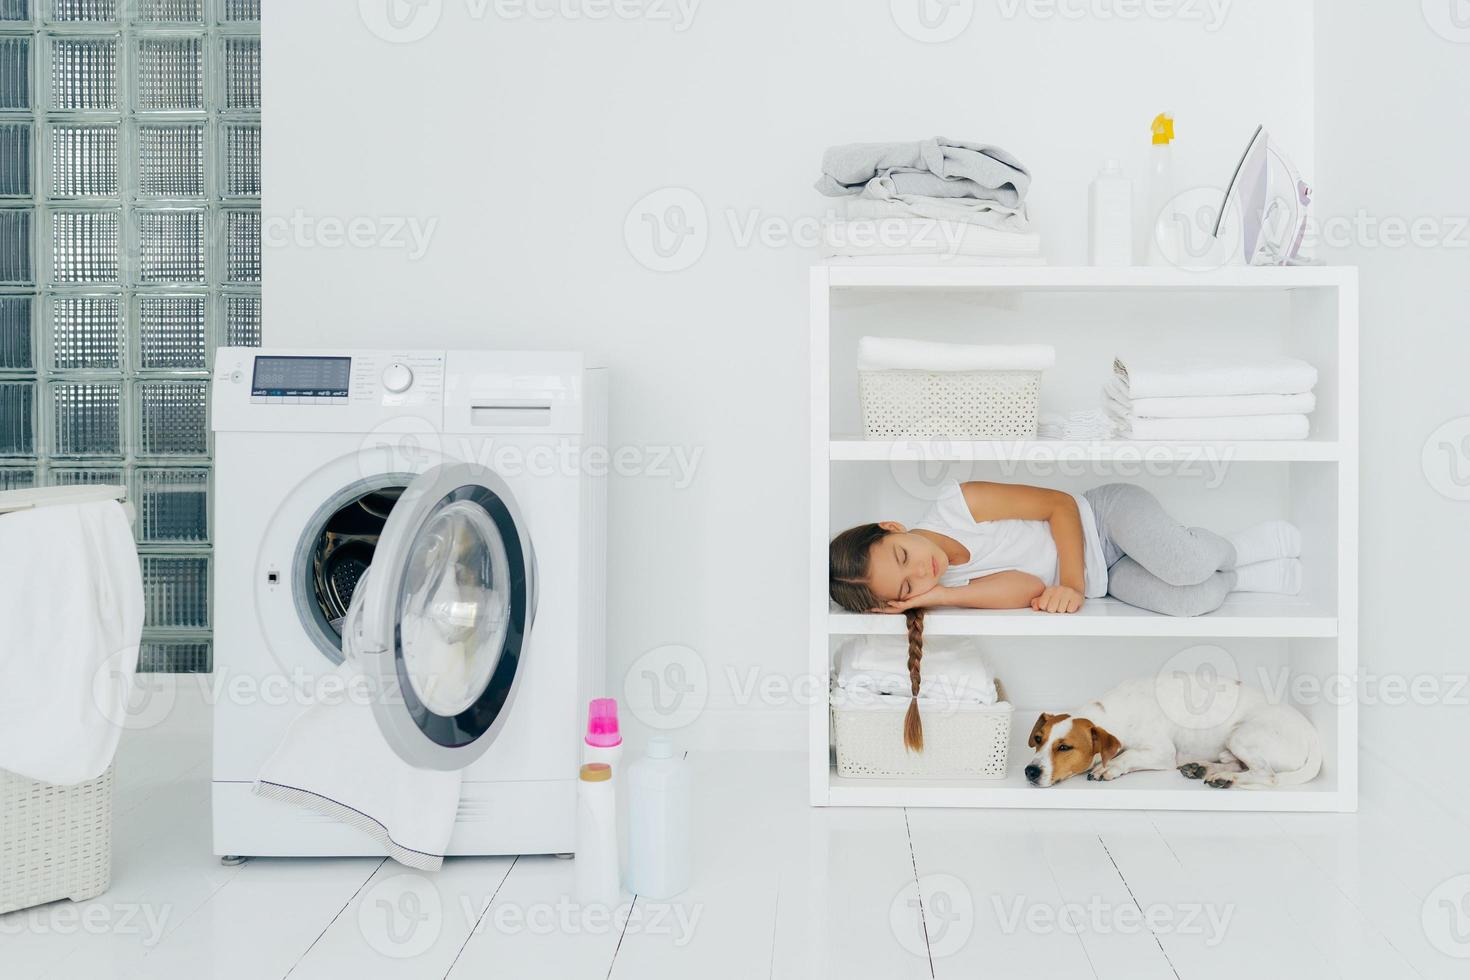 Tired female child rests on console shelf together with pet, does washing at home, sleeps in laundry room, opened washing machine with dirty towel inside. Childhood, cleanliness, family chores concept photo